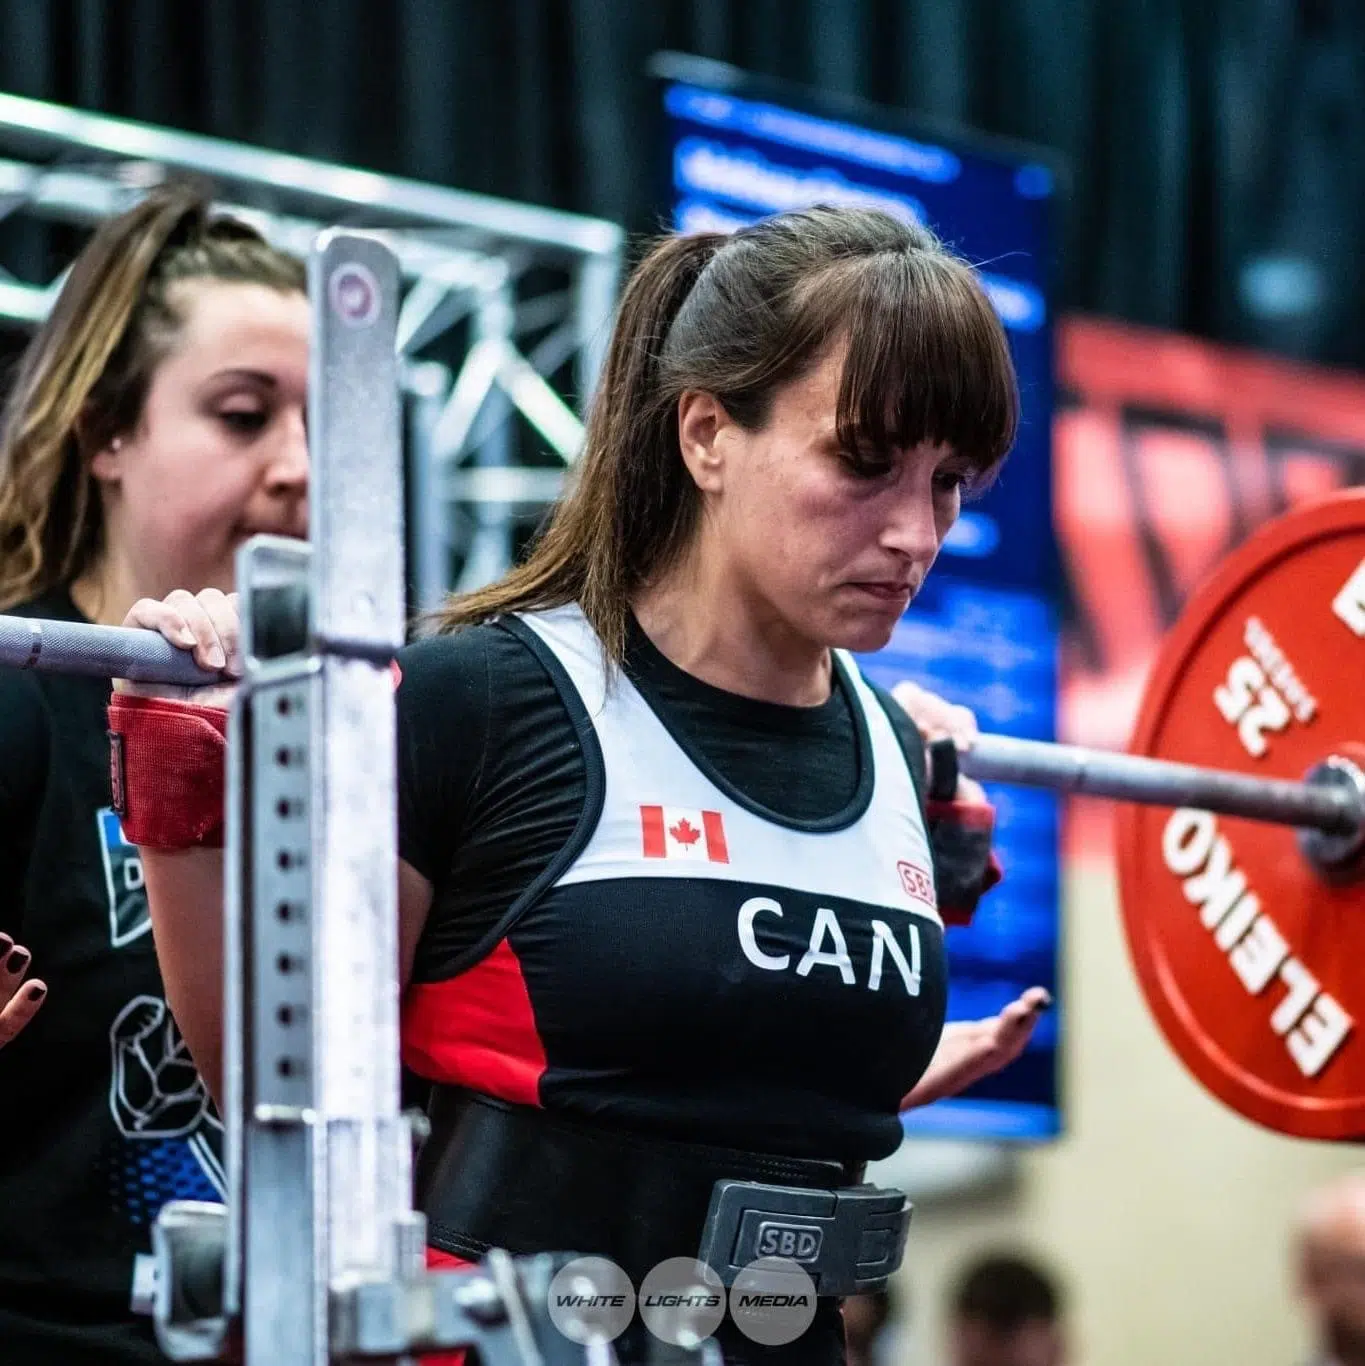 Local Powerlifter Heading To Sweden